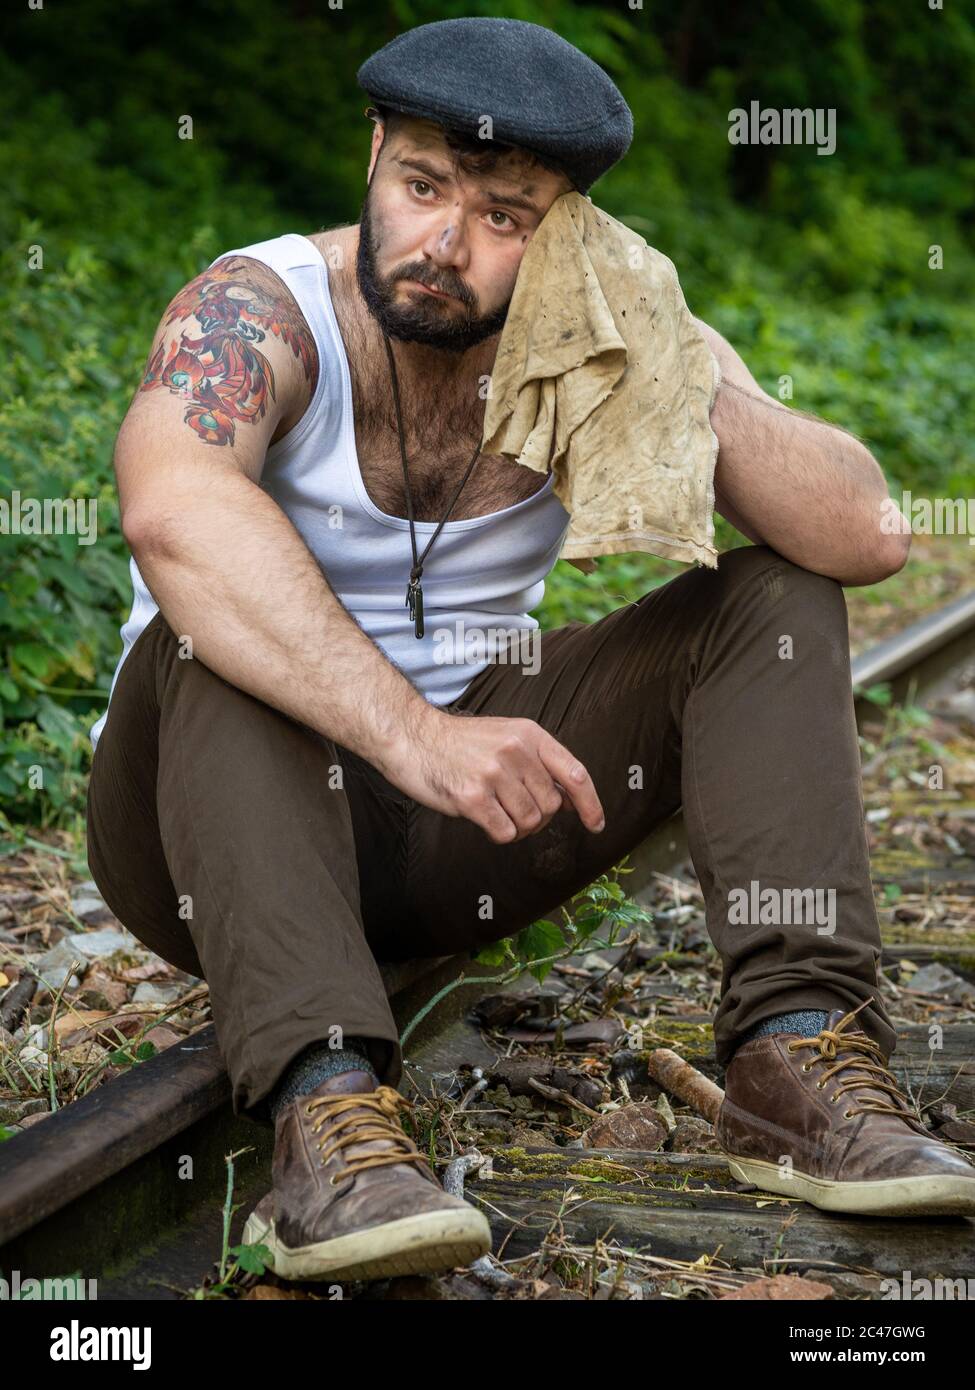 5412173 5184x3456 man fashion person nature outdoor portrait blur  caucasian handsome style natural train think photography bokeh boy  thinking rugged PNG images tattoo railroad  Rare Gallery HD Wallpapers